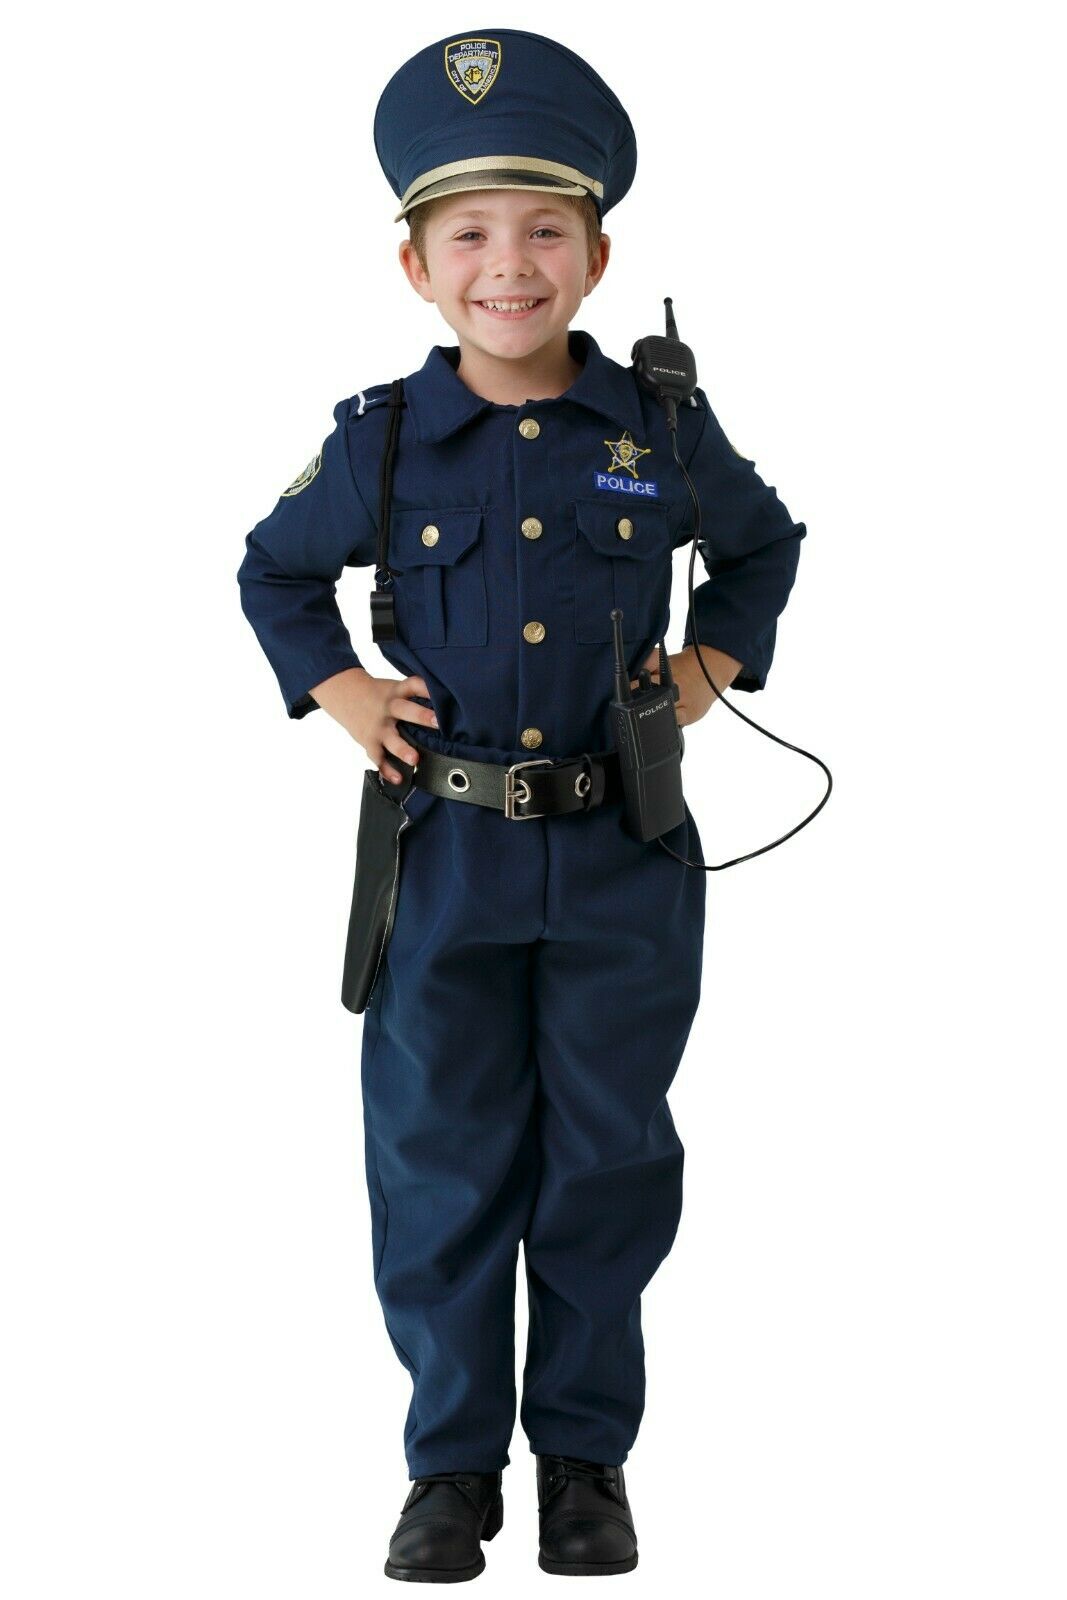 Police Costume Set For Boys And Girls - Cop Role Play Set By Dress Up America